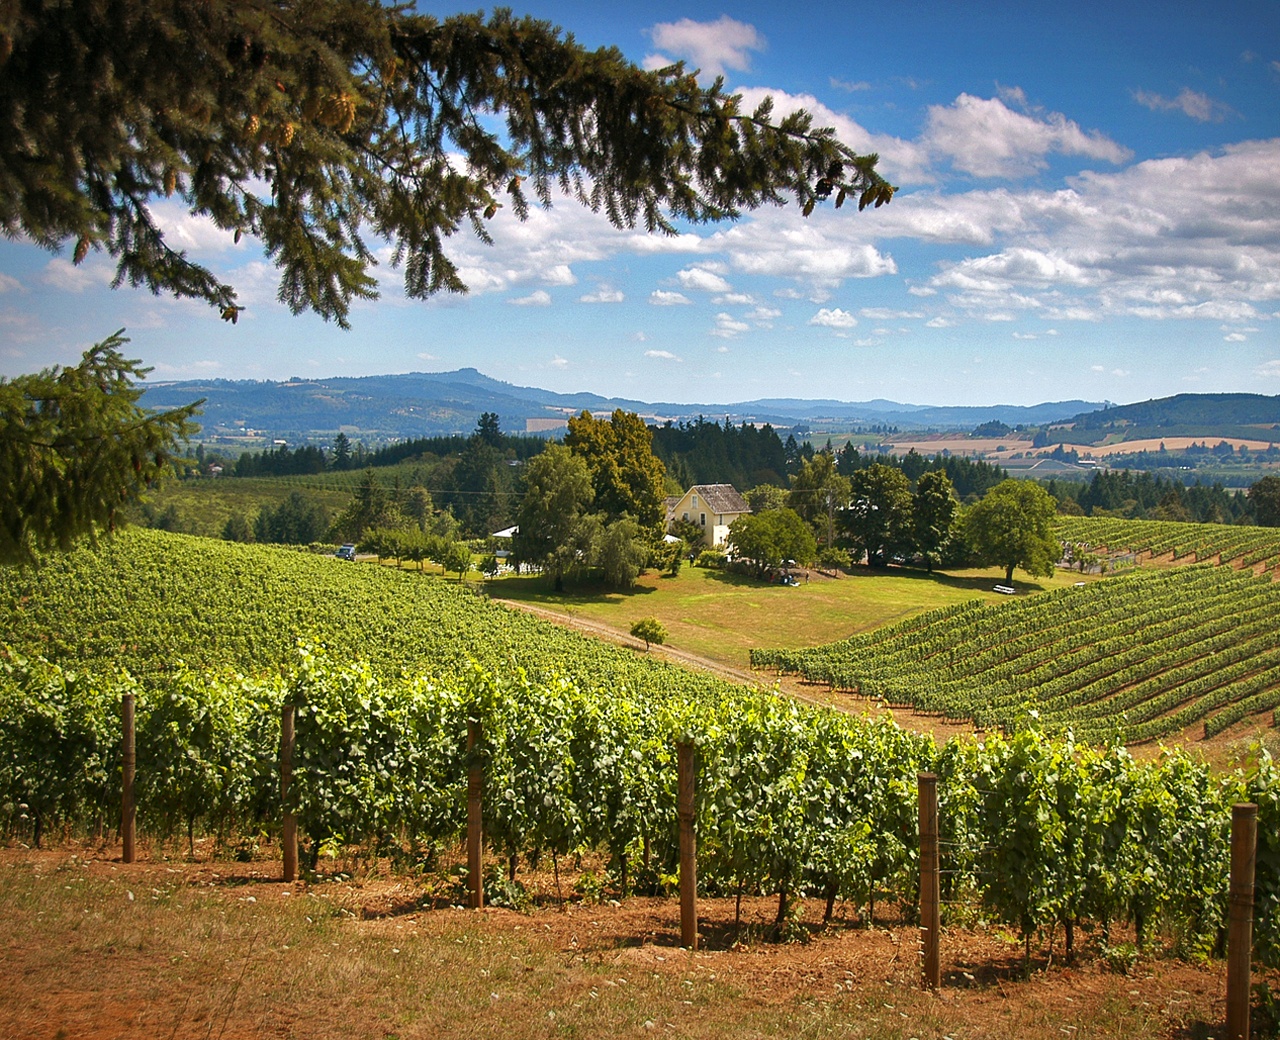 North Willamette Valley Winery Tour | The Official Guide to Portland